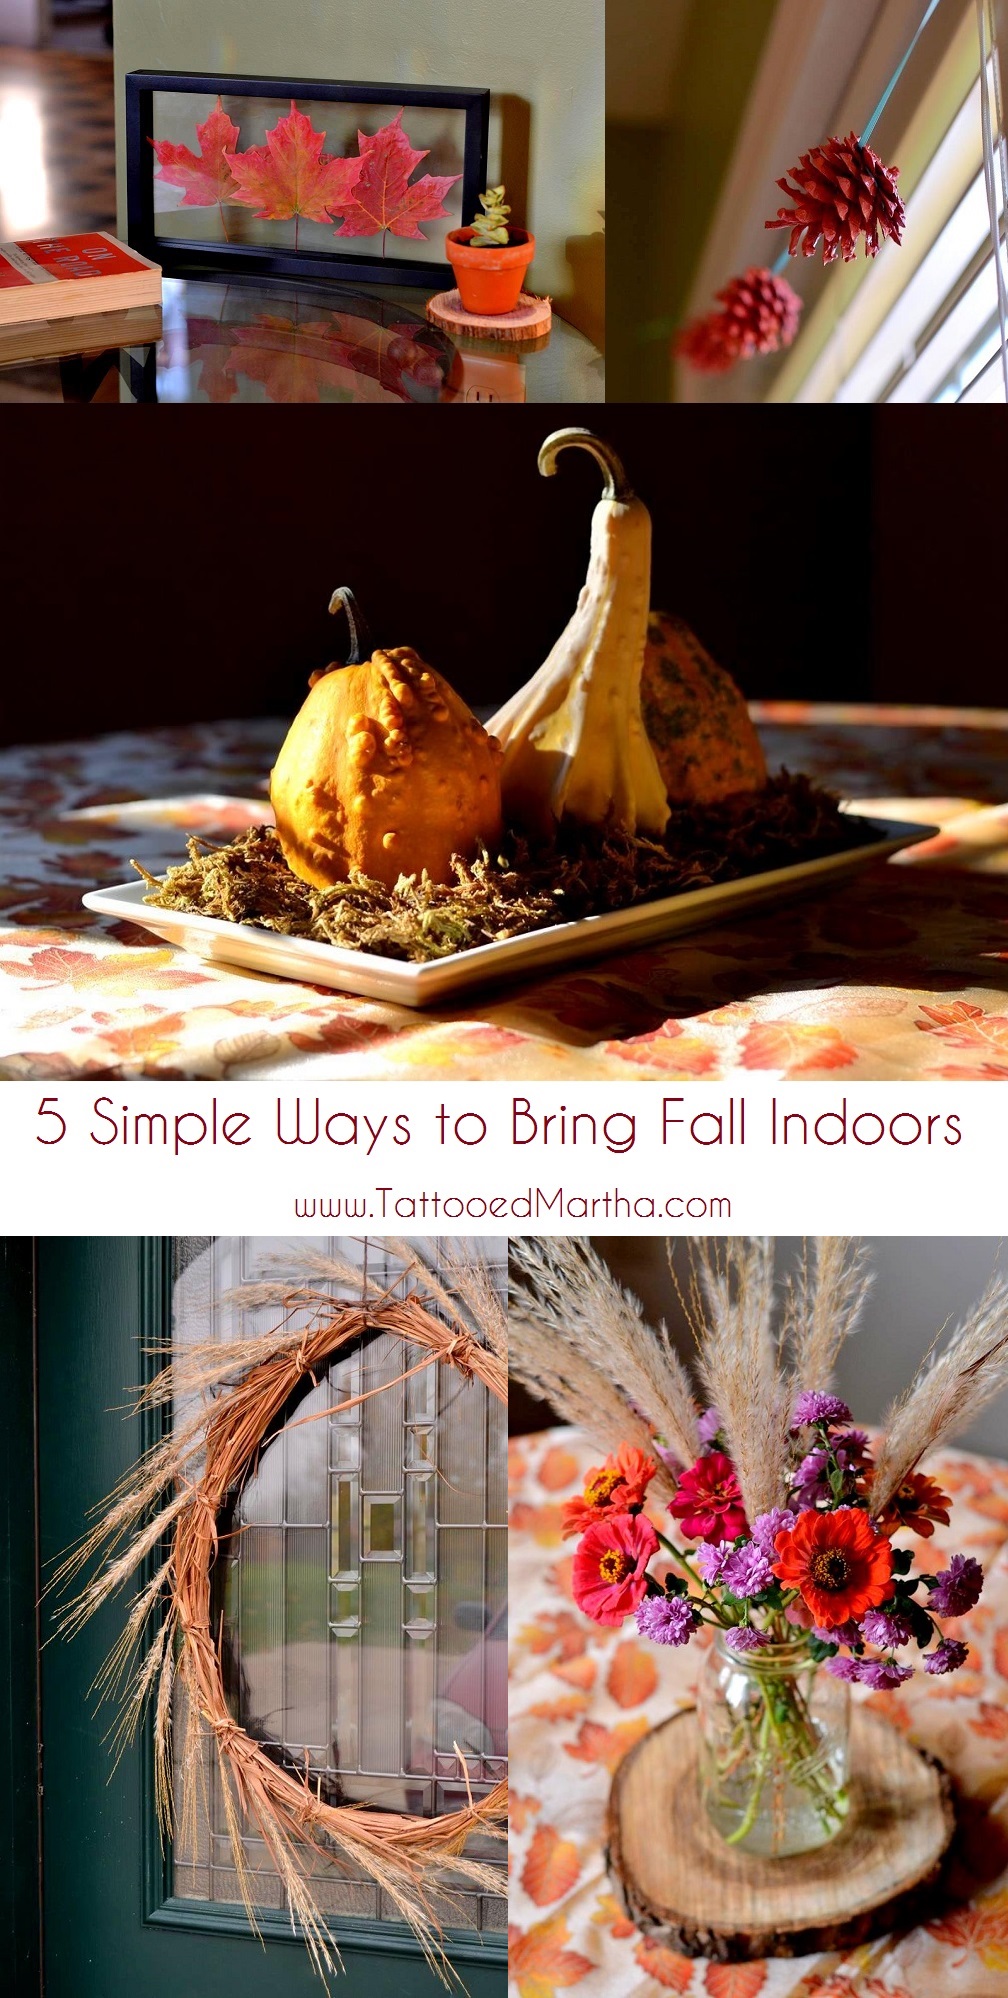 5 Simple Ways to Bring Fall Indoors